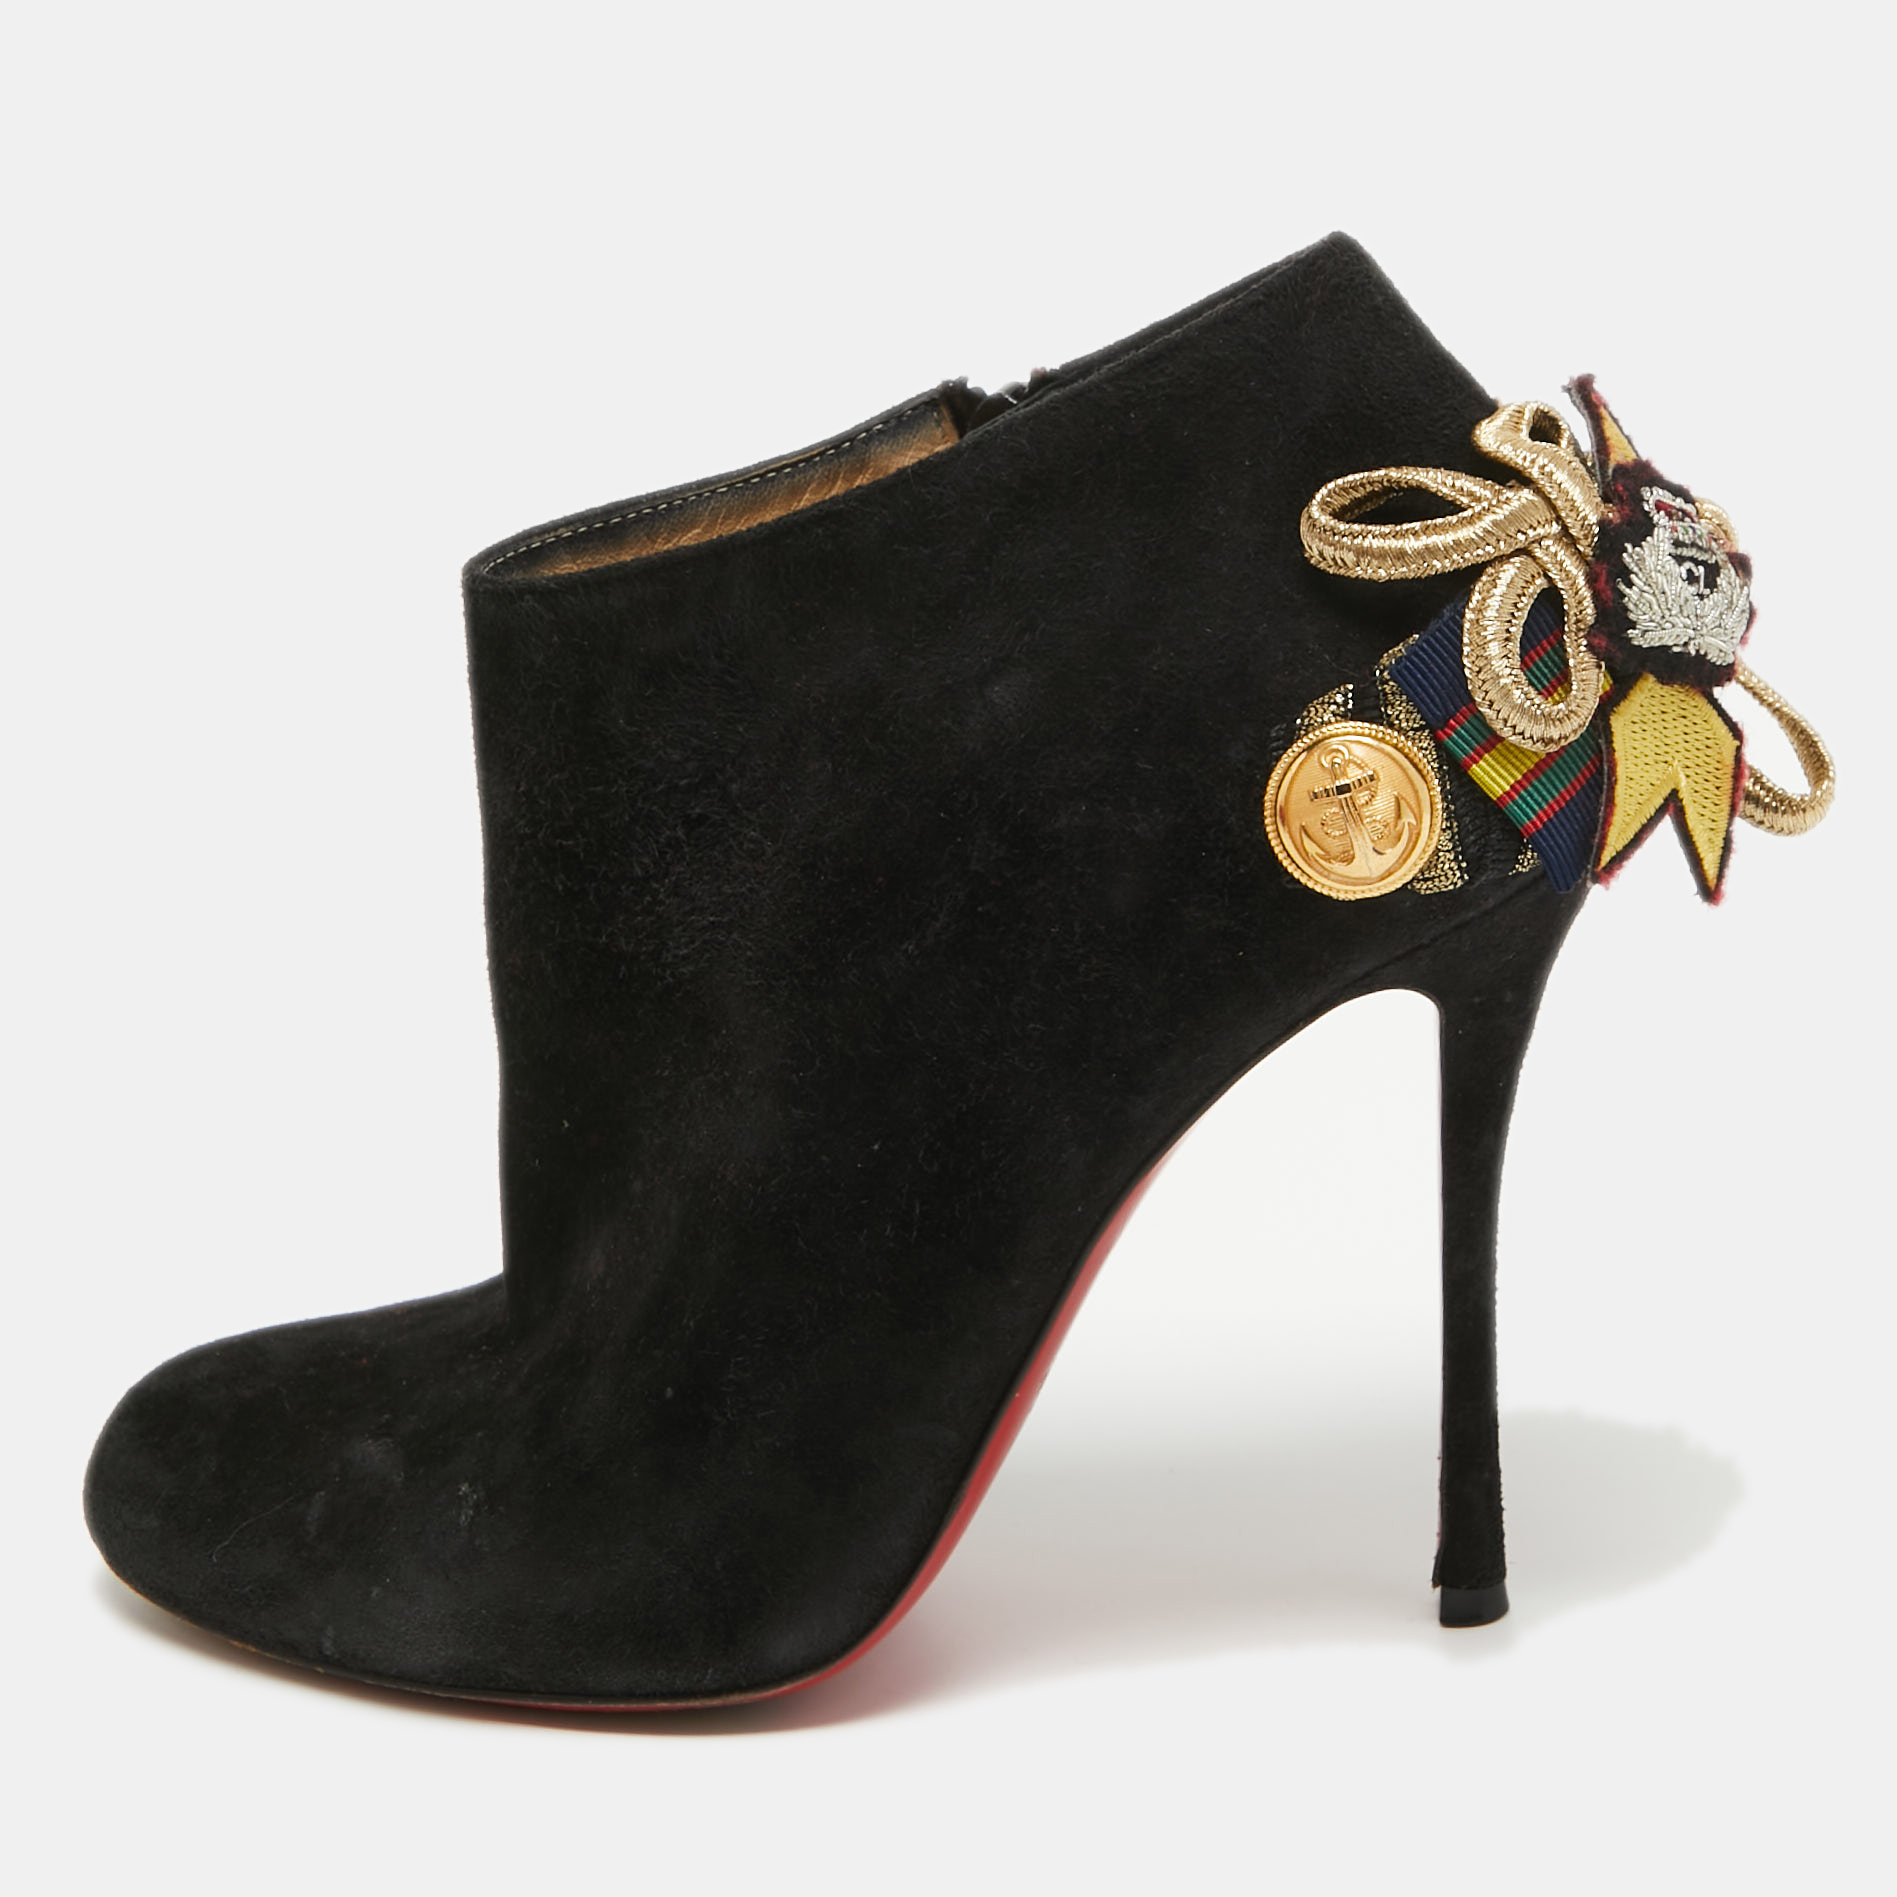 Pre-owned Christian Louboutin Black Suede Galobella Ankle Boots Size 38